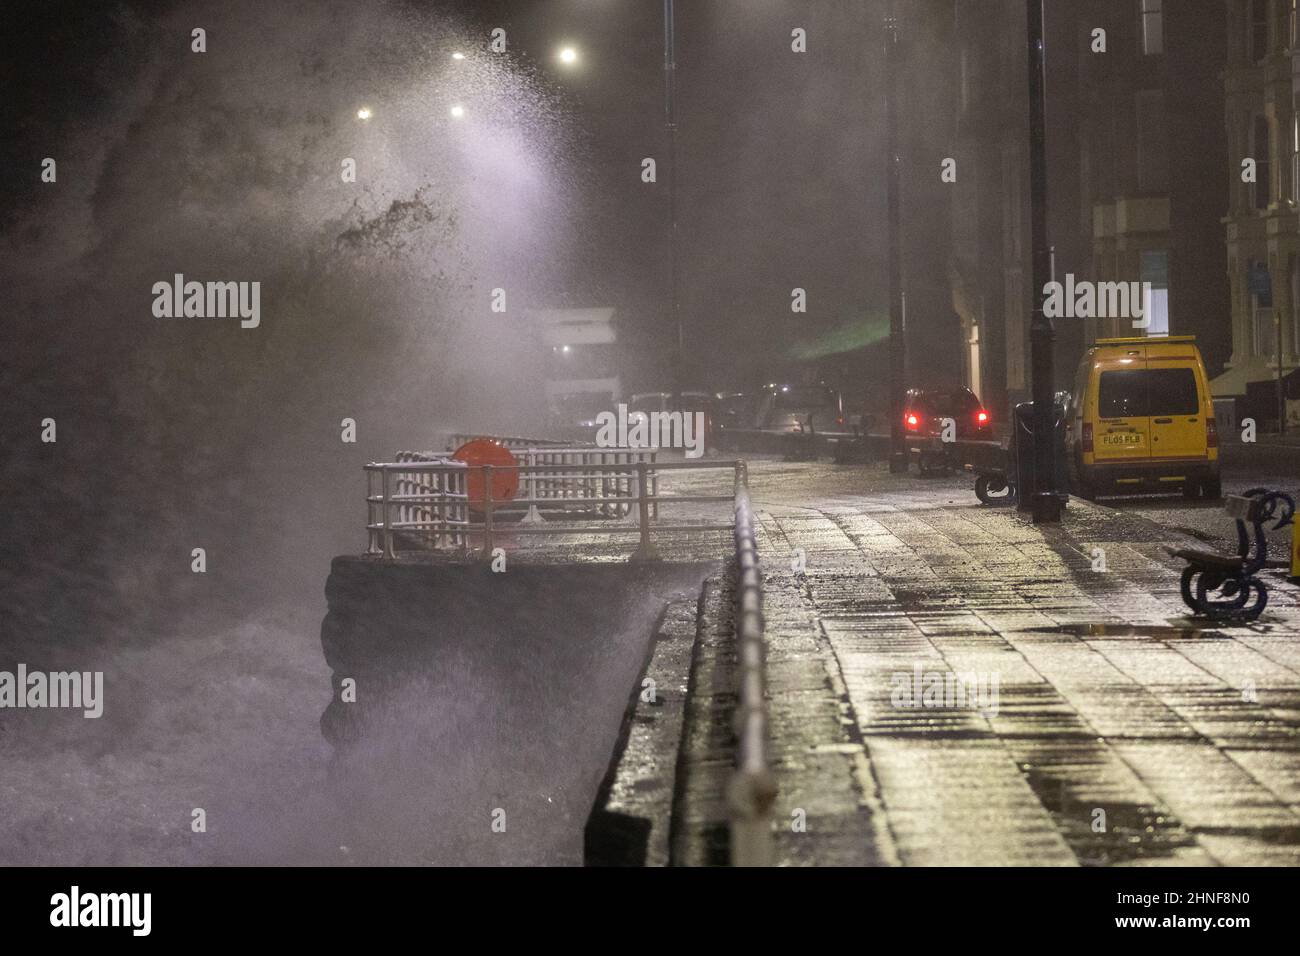 Aberystwyth, Ceredigion, Wales, UK. 16th February 2022  UK Weather: A windy night in Aberystwyth, as storm Dudley combines with a high tide, bringing rough seas crashing against the promenade. © Ian Jones/Alamy Live News Stock Photo